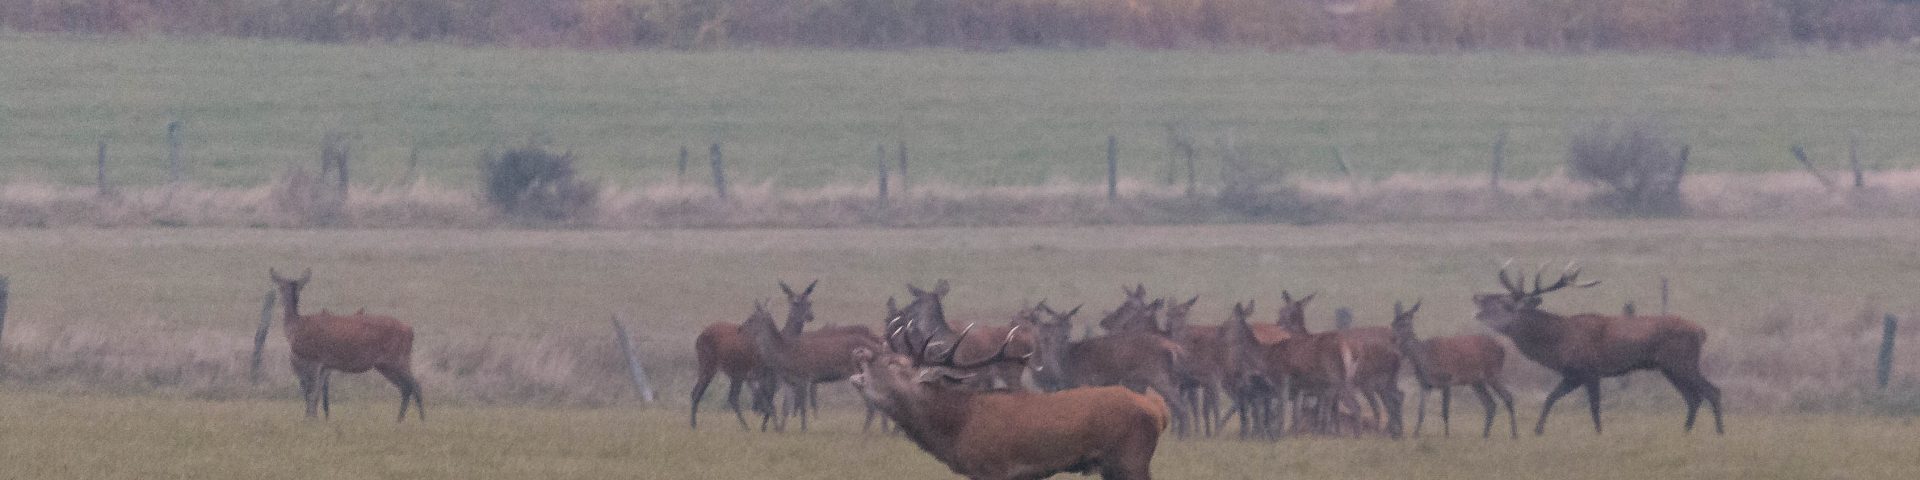 Stags herding with female herd